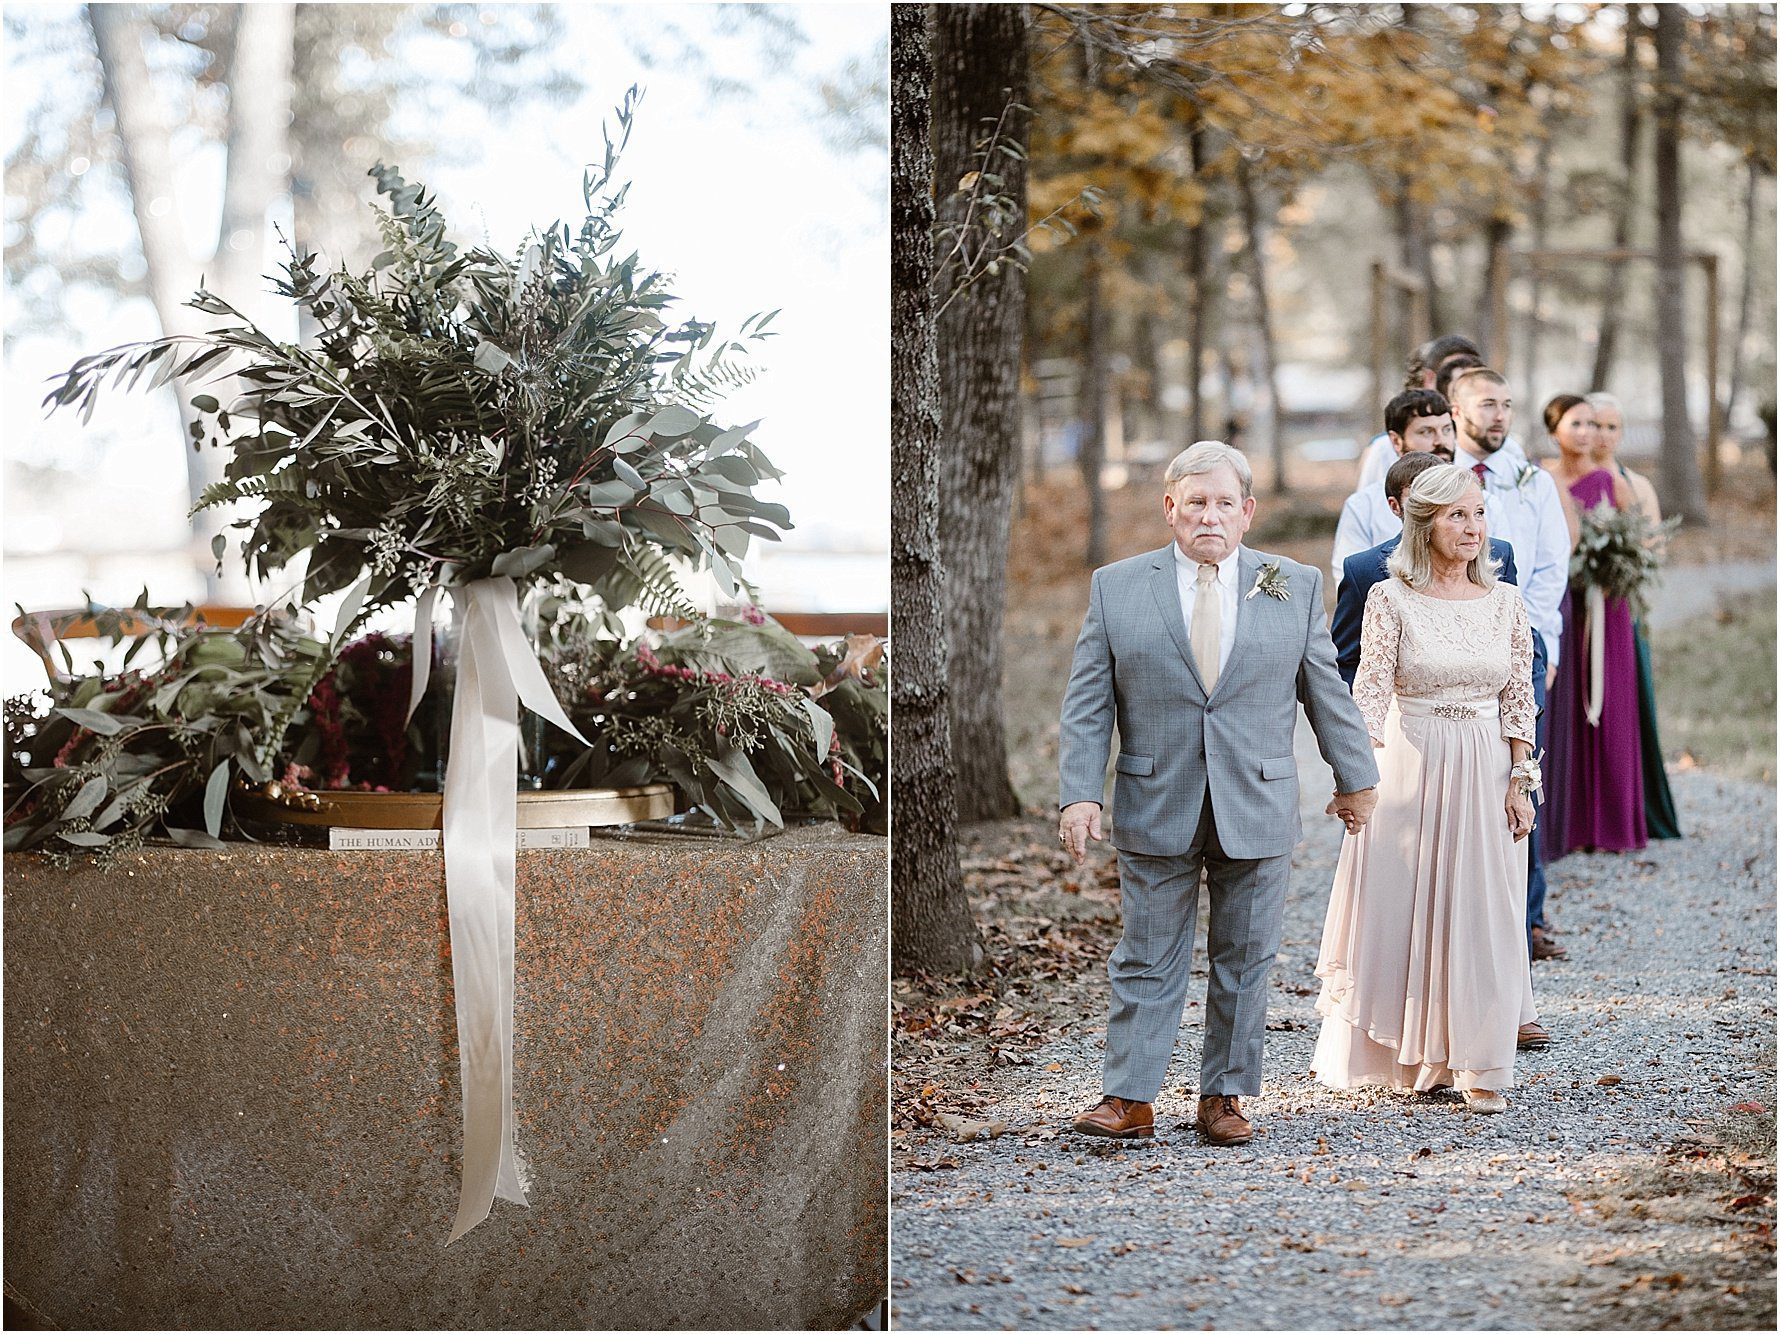 Outdoor Wedding Venues in Knoxville | Erin Morrison Photography www.erinmorrisonphotography.com